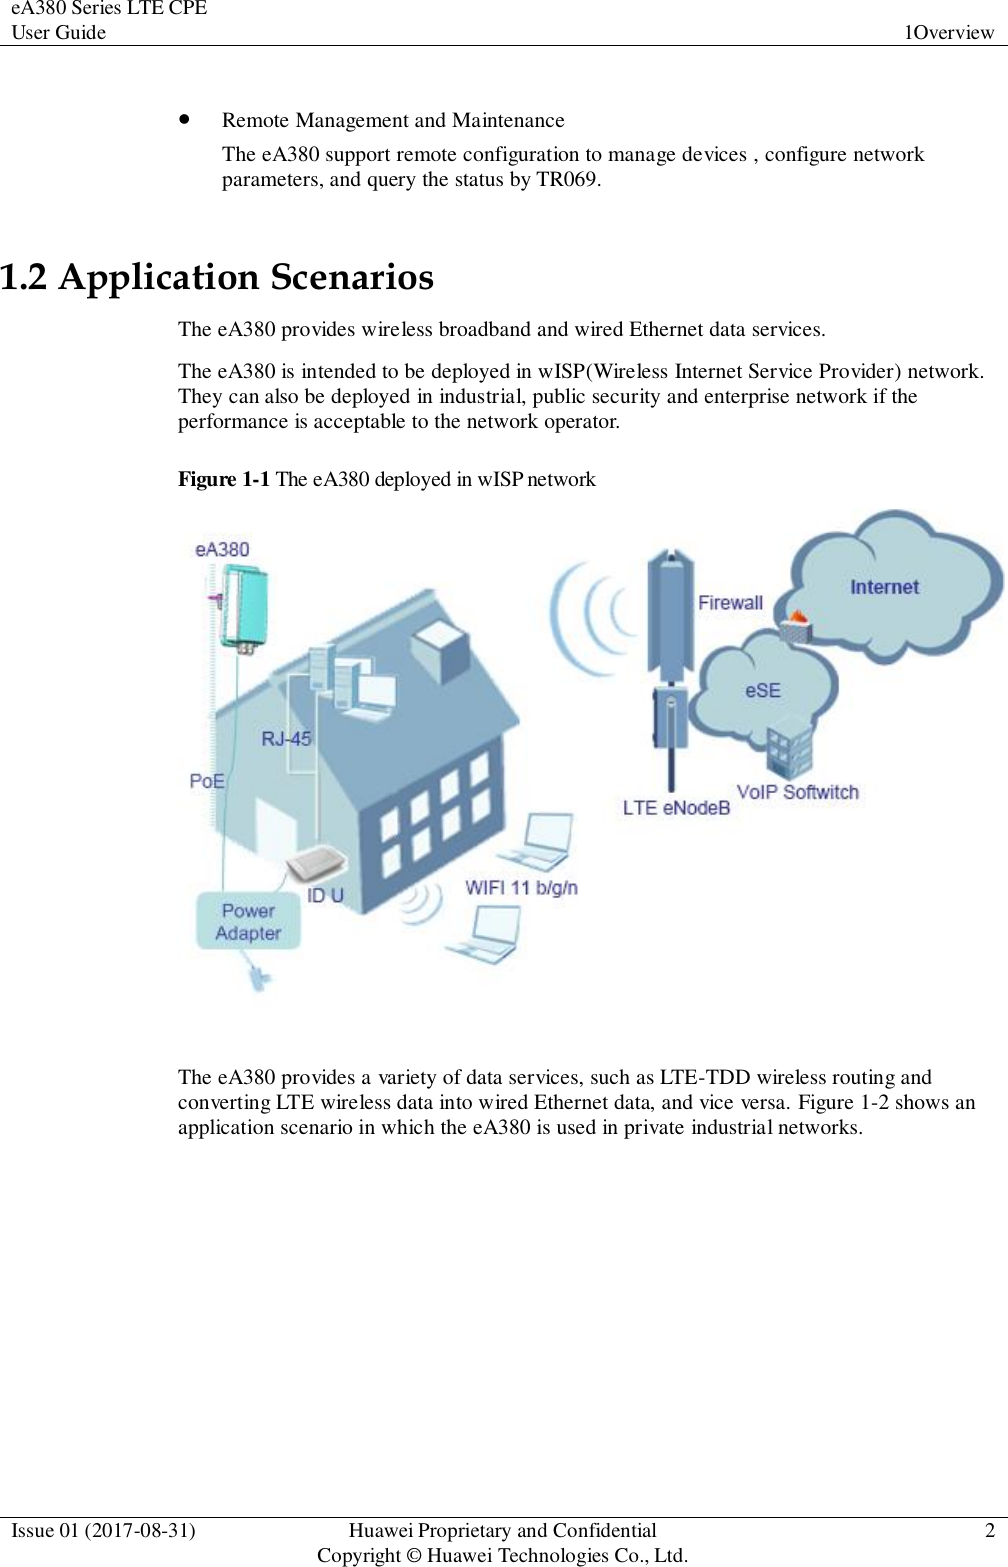 eA380 Series LTE CPE User Guide  1Overview  Issue 01 (2017-08-31)  Huawei Proprietary and Confidential                                     Copyright © Huawei Technologies Co., Ltd.  2    Remote Management and Maintenance The eA380 support remote configuration to manage devices , configure network parameters, and query the status by TR069. 1.2 Application Scenarios The eA380 provides wireless broadband and wired Ethernet data services. The eA380 is intended to be deployed in wISP(Wireless Internet Service Provider) network. They can also be deployed in industrial, public security and enterprise network if the performance is acceptable to the network operator. Figure 1-1 The eA380 deployed in wISP network   The eA380 provides a variety of data services, such as LTE-TDD wireless routing and converting LTE wireless data into wired Ethernet data, and vice versa. Figure 1-2 shows an application scenario in which the eA380 is used in private industrial networks.   